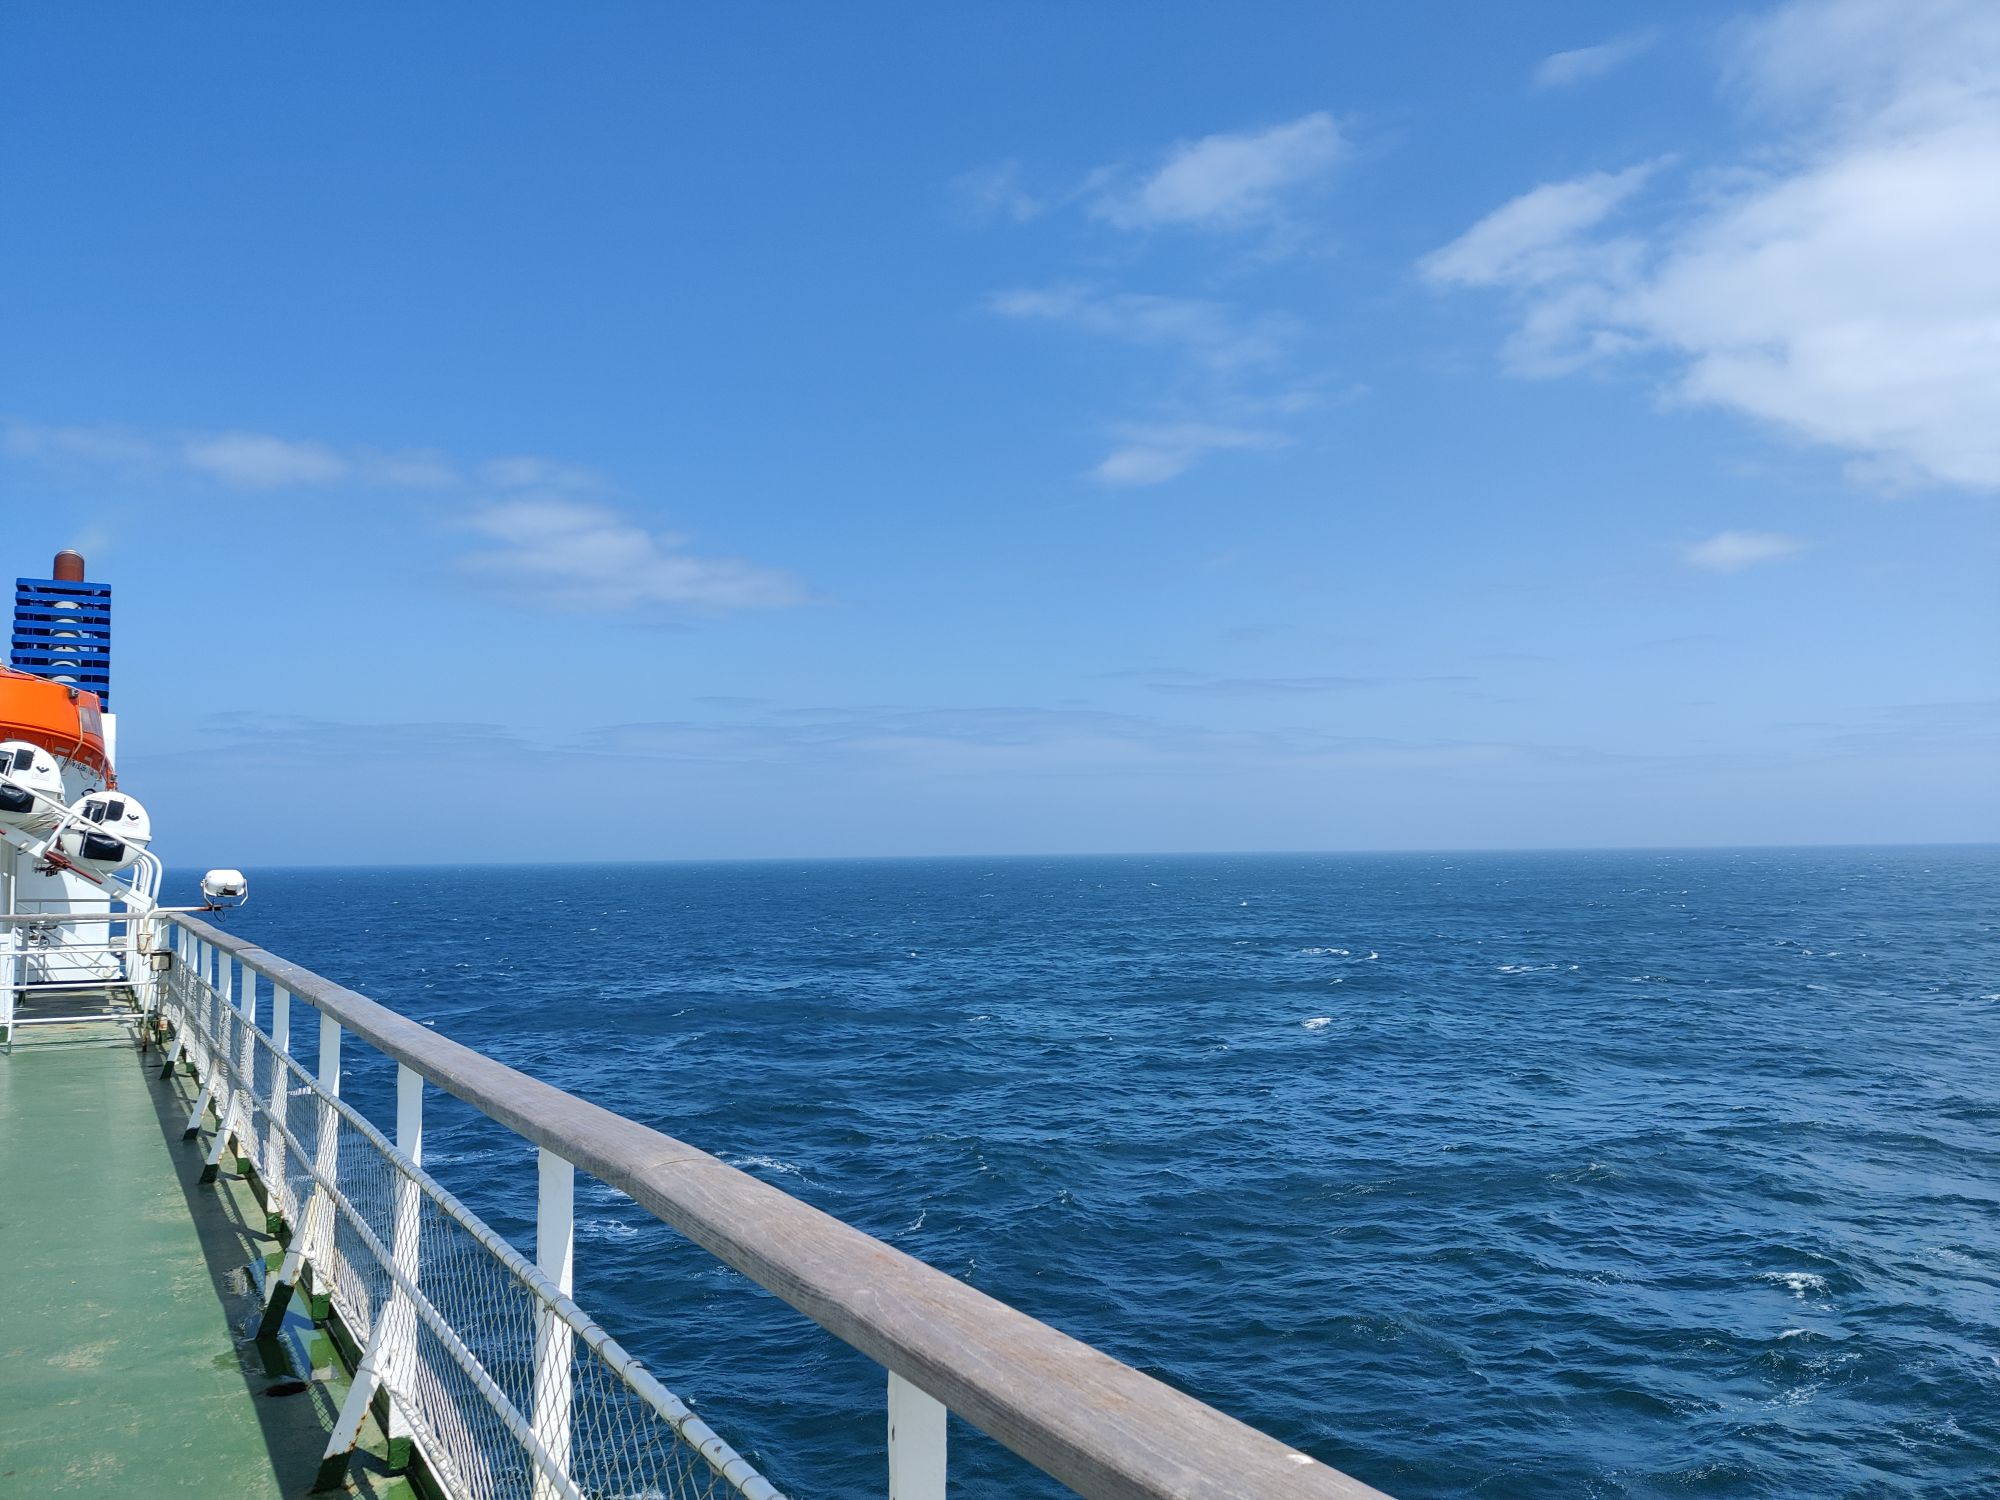 Looking out over a deep blue sea with a clear sky, off the edge of a ferry